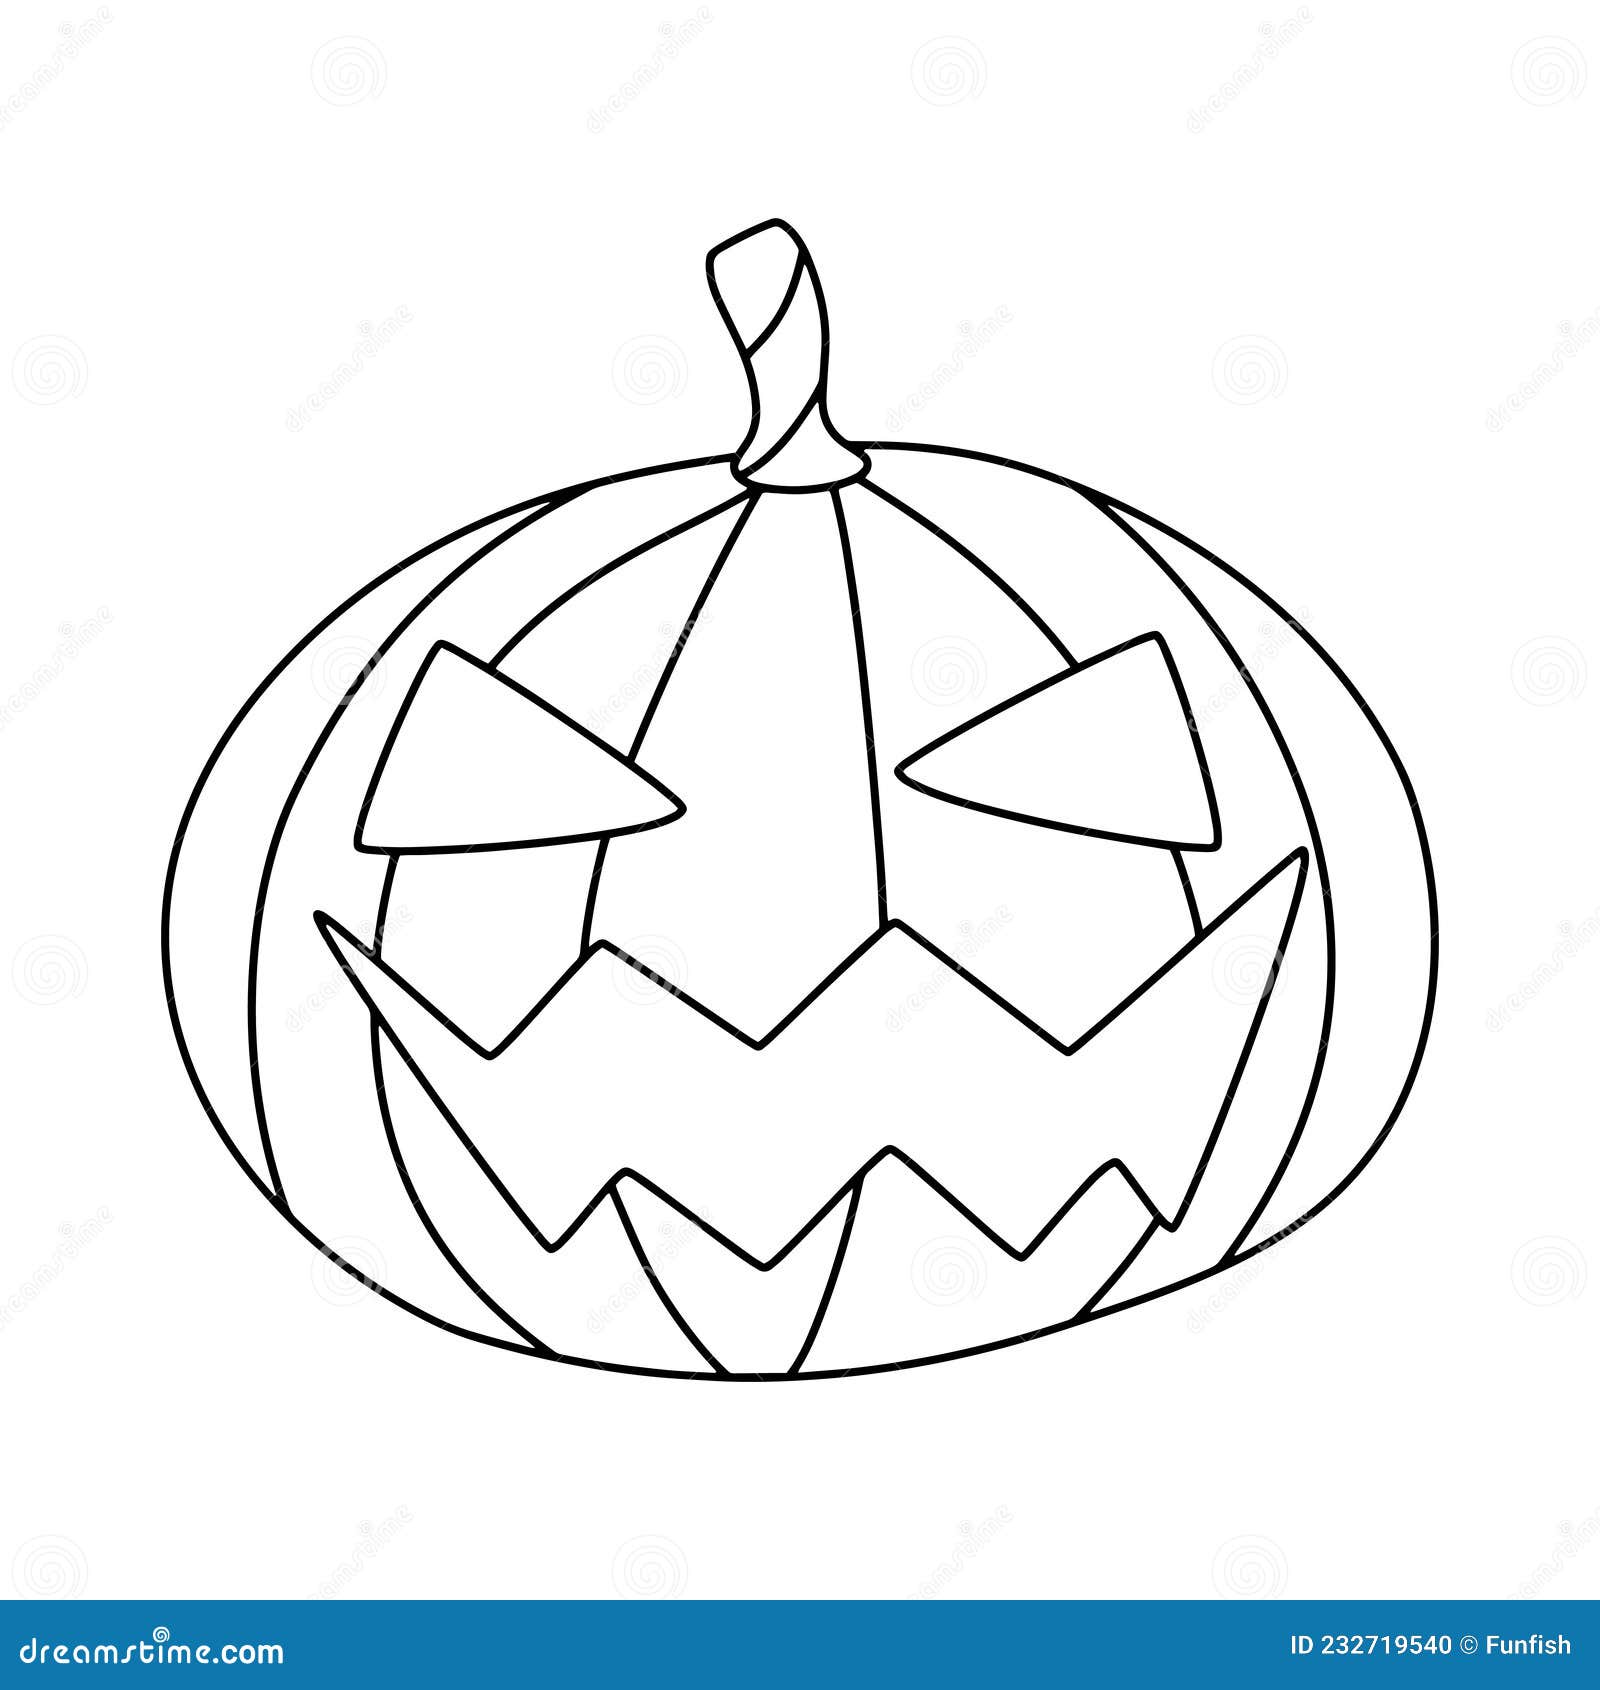 Funny halloween pumpkin coloring page for kids vector illustration spooky hand